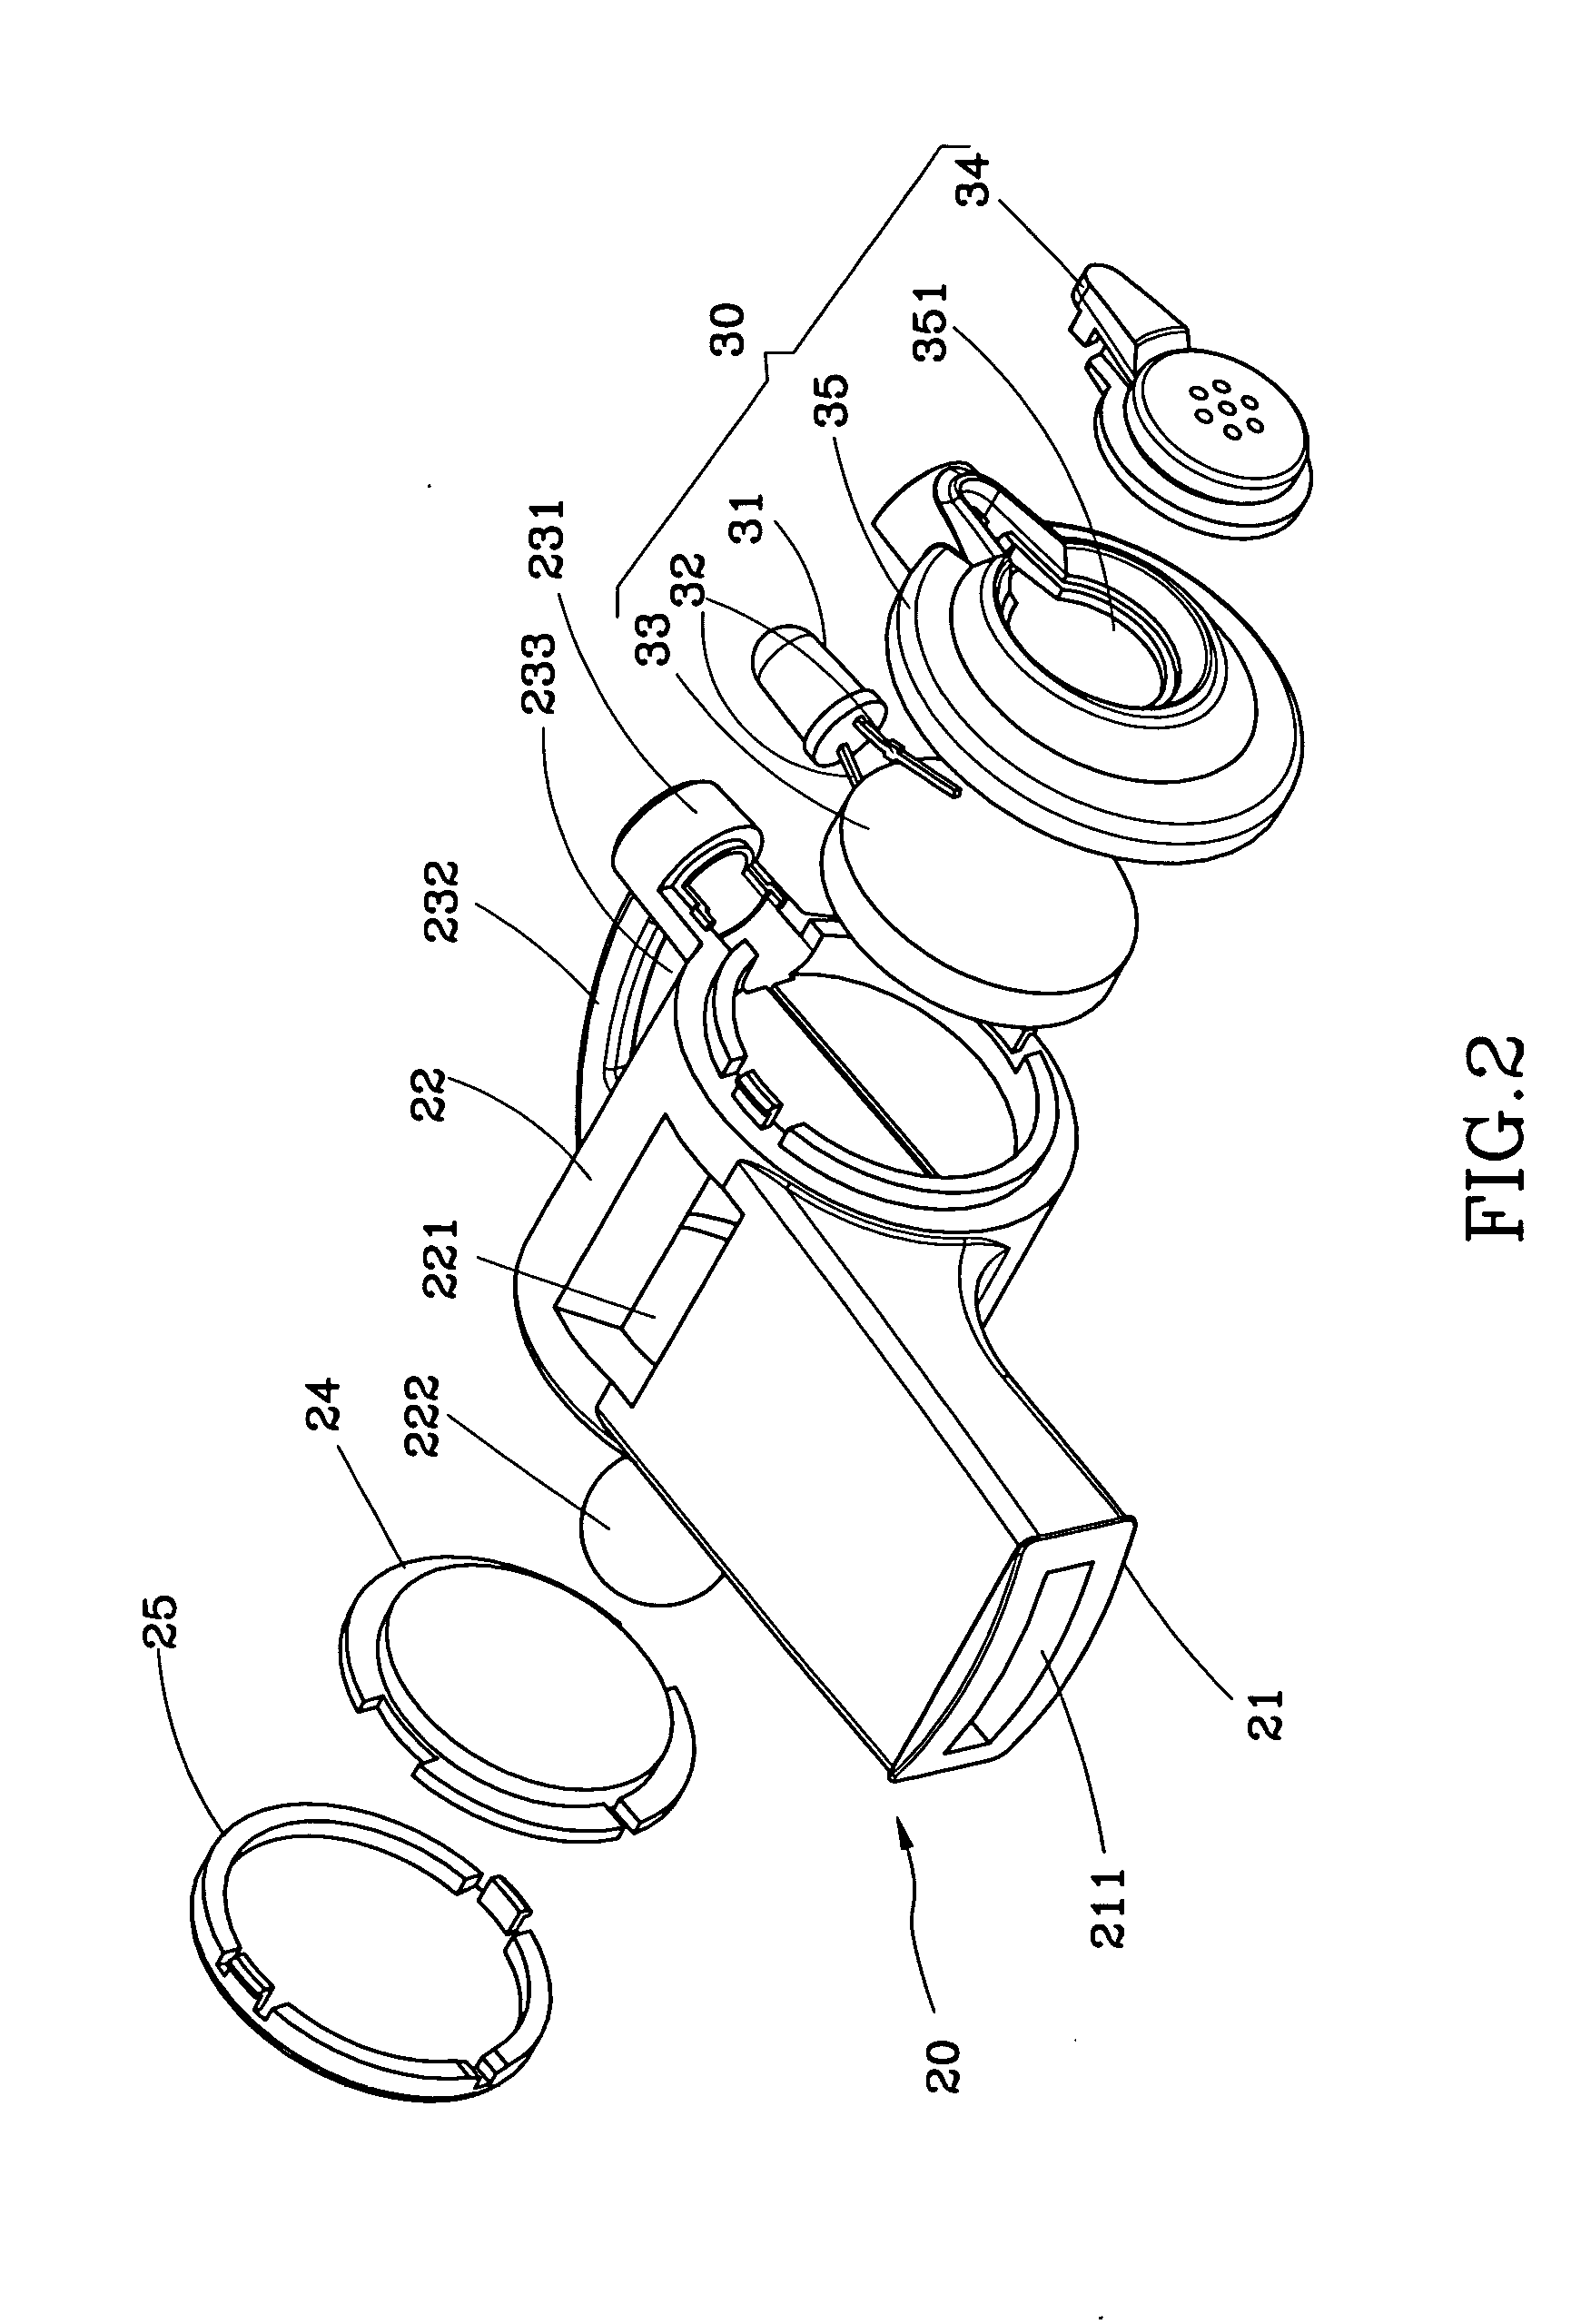 Whistle with light emitting device